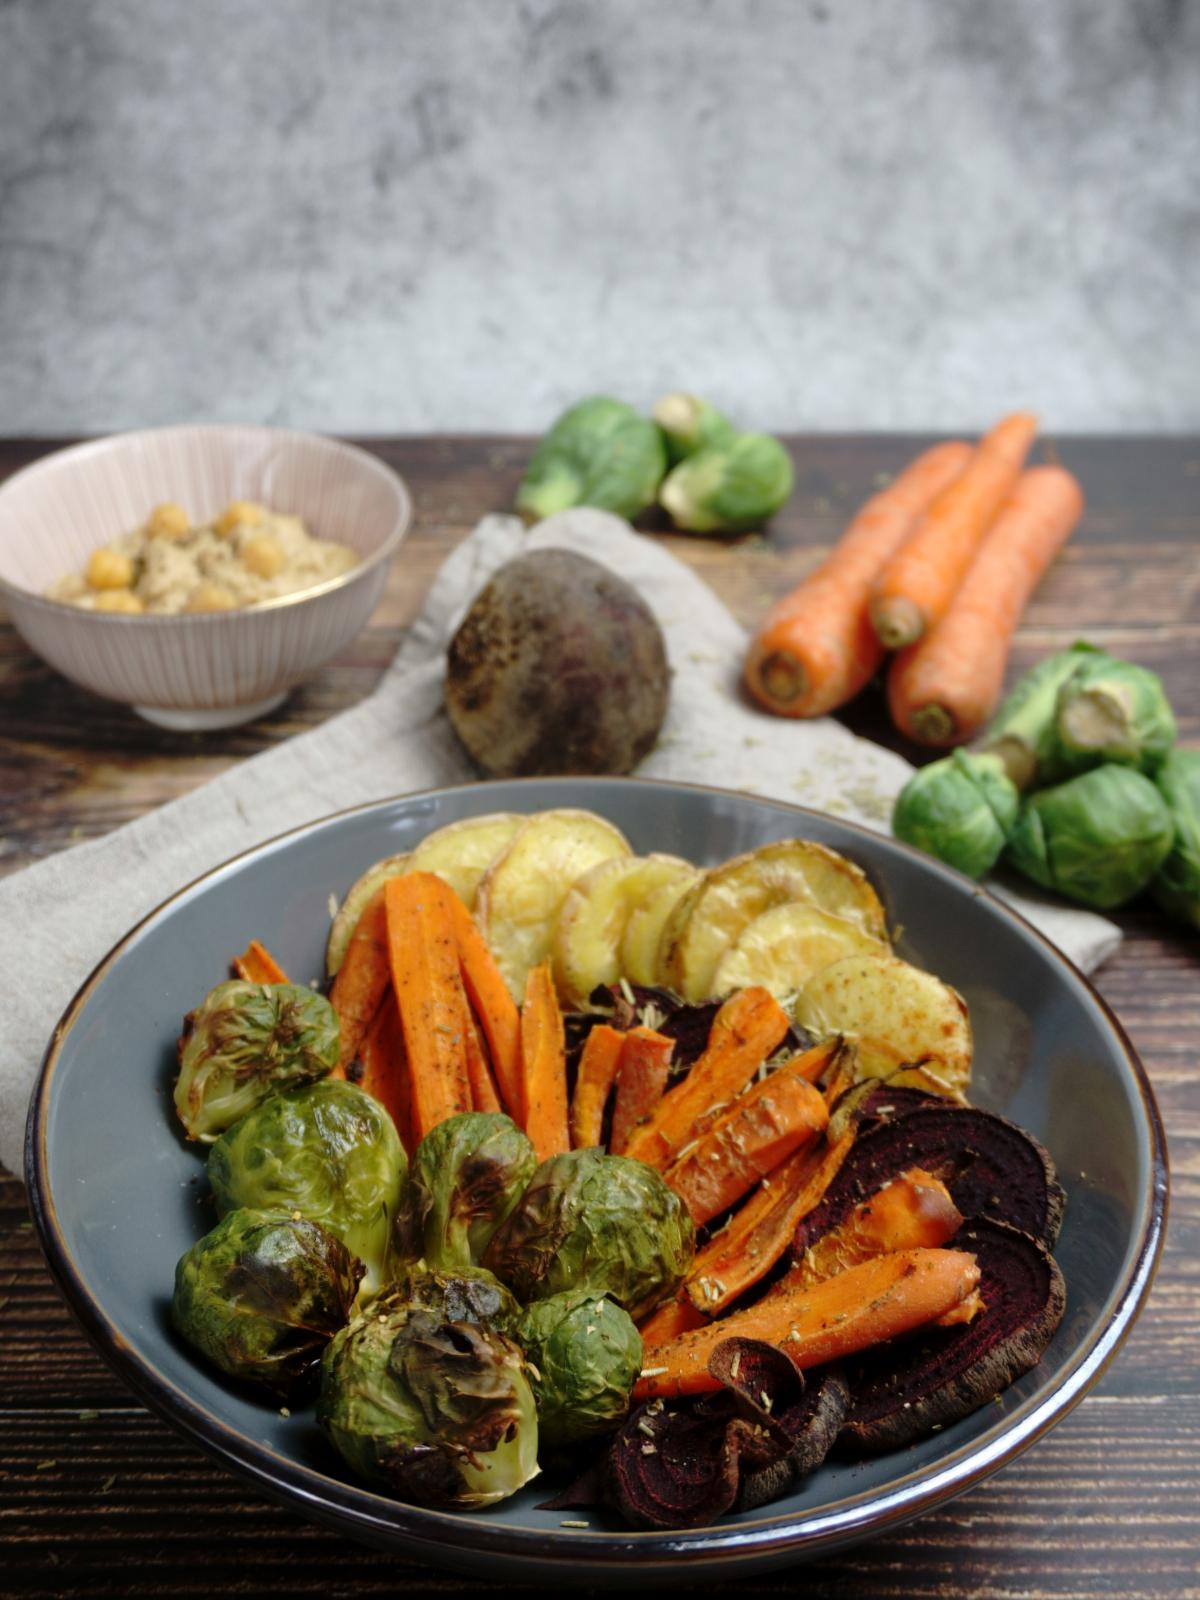 Oven Roasted Vegetables With Potatoes 5